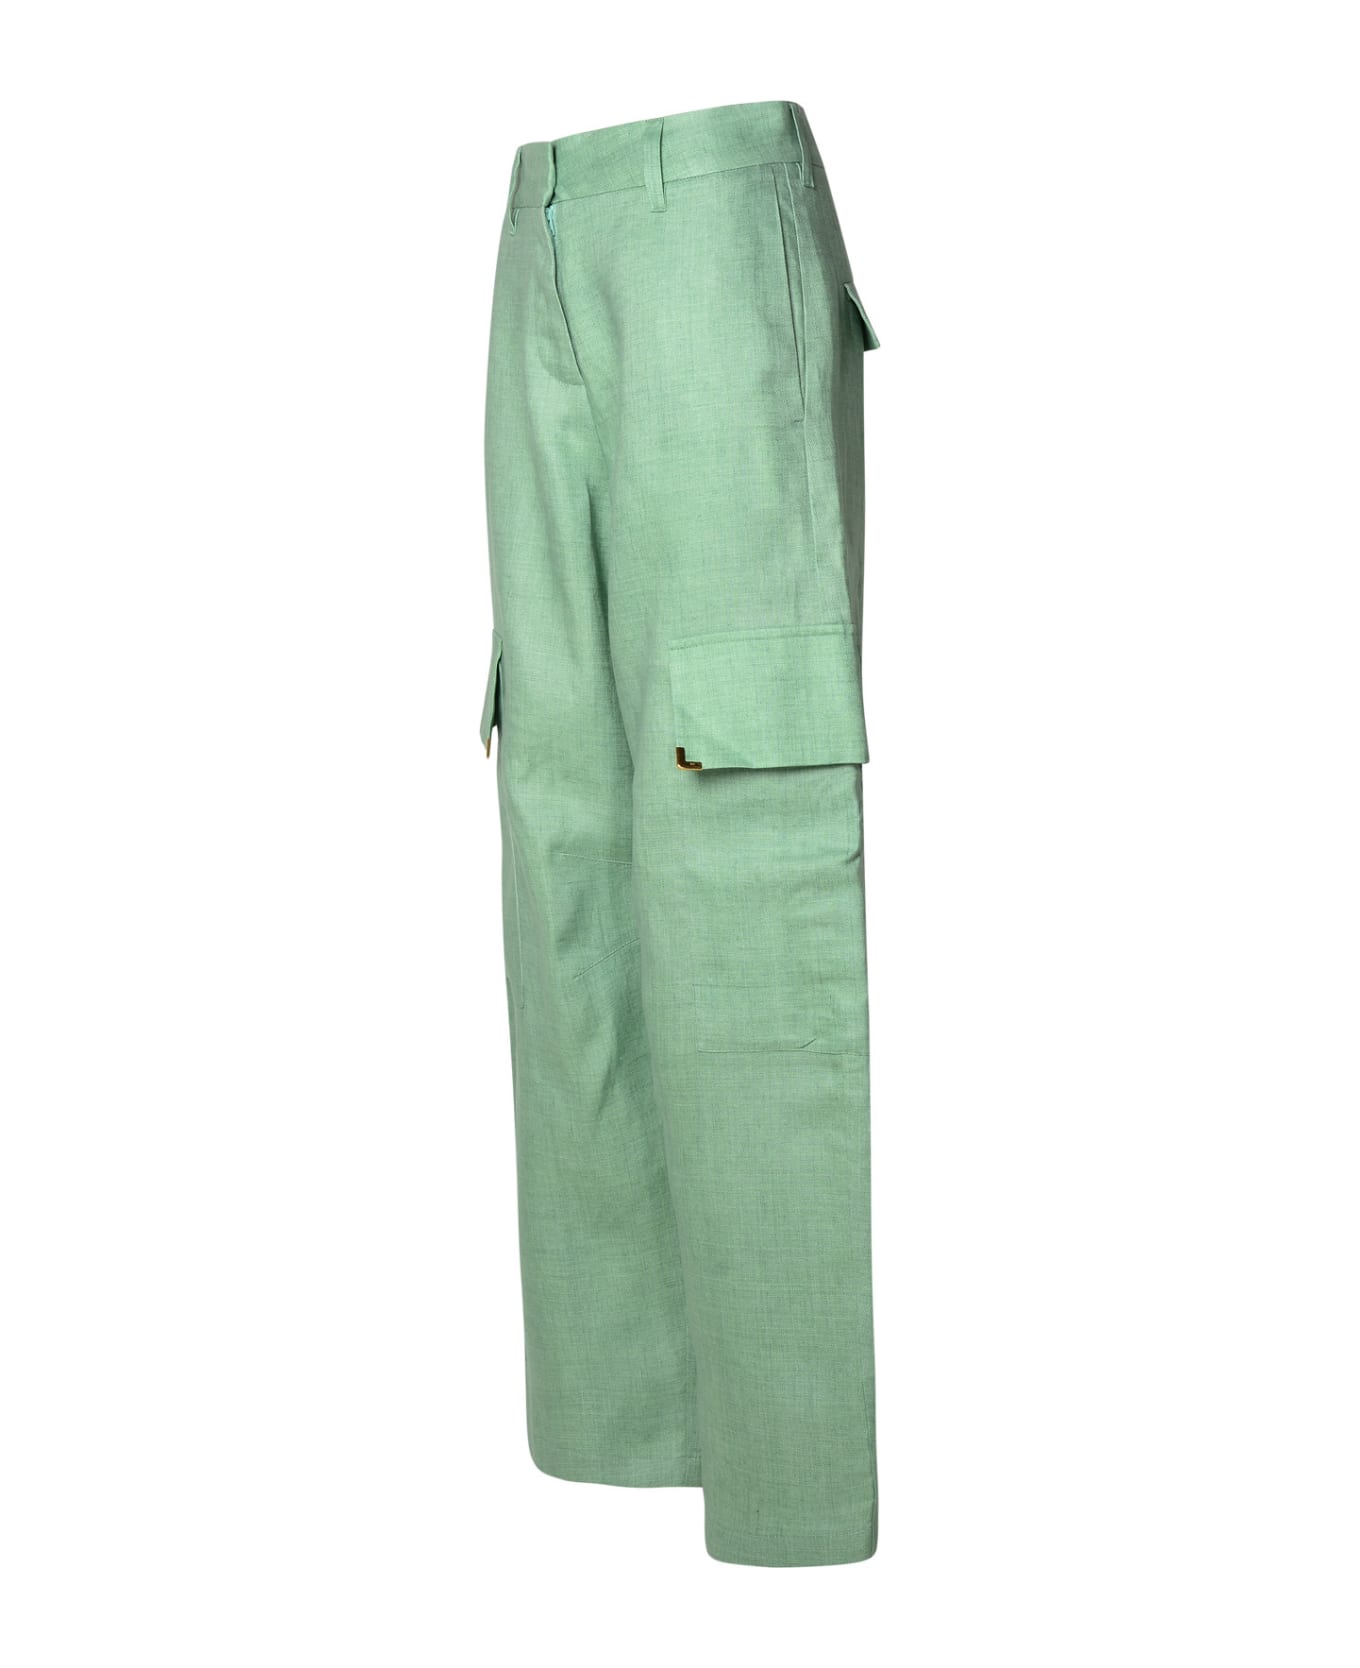 Palm Angels Cargo Pants - Green